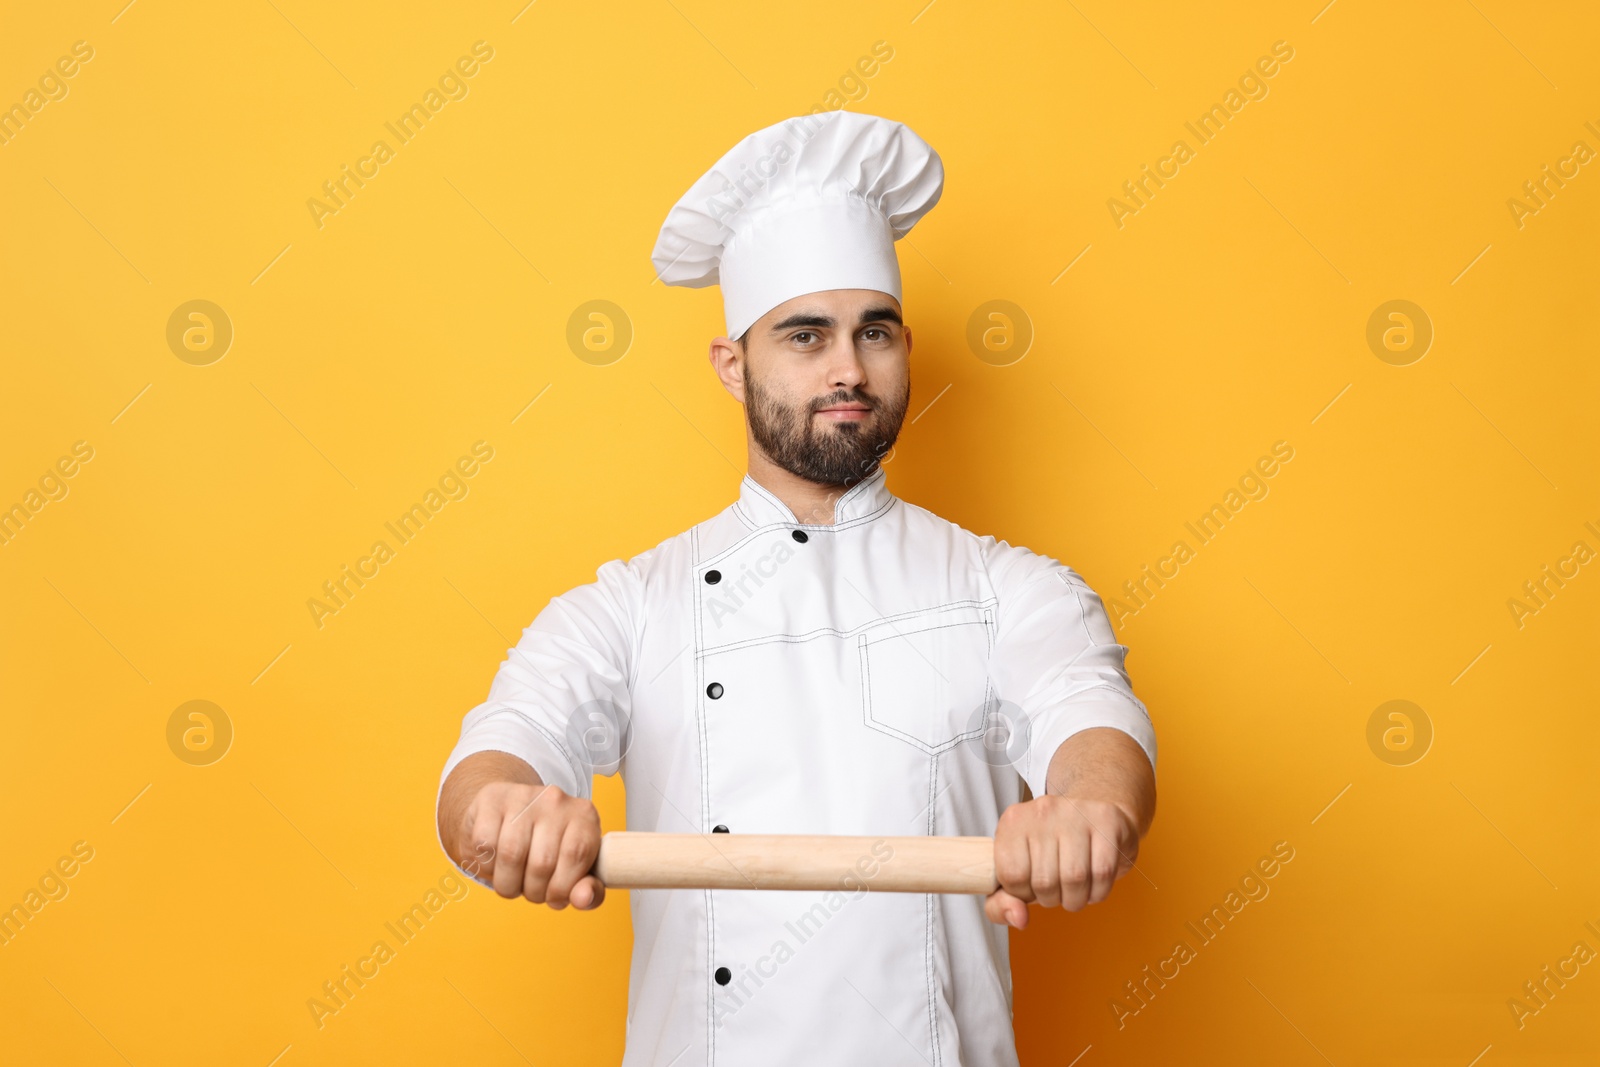 Photo of Professional chef with rolling pin on yellow background